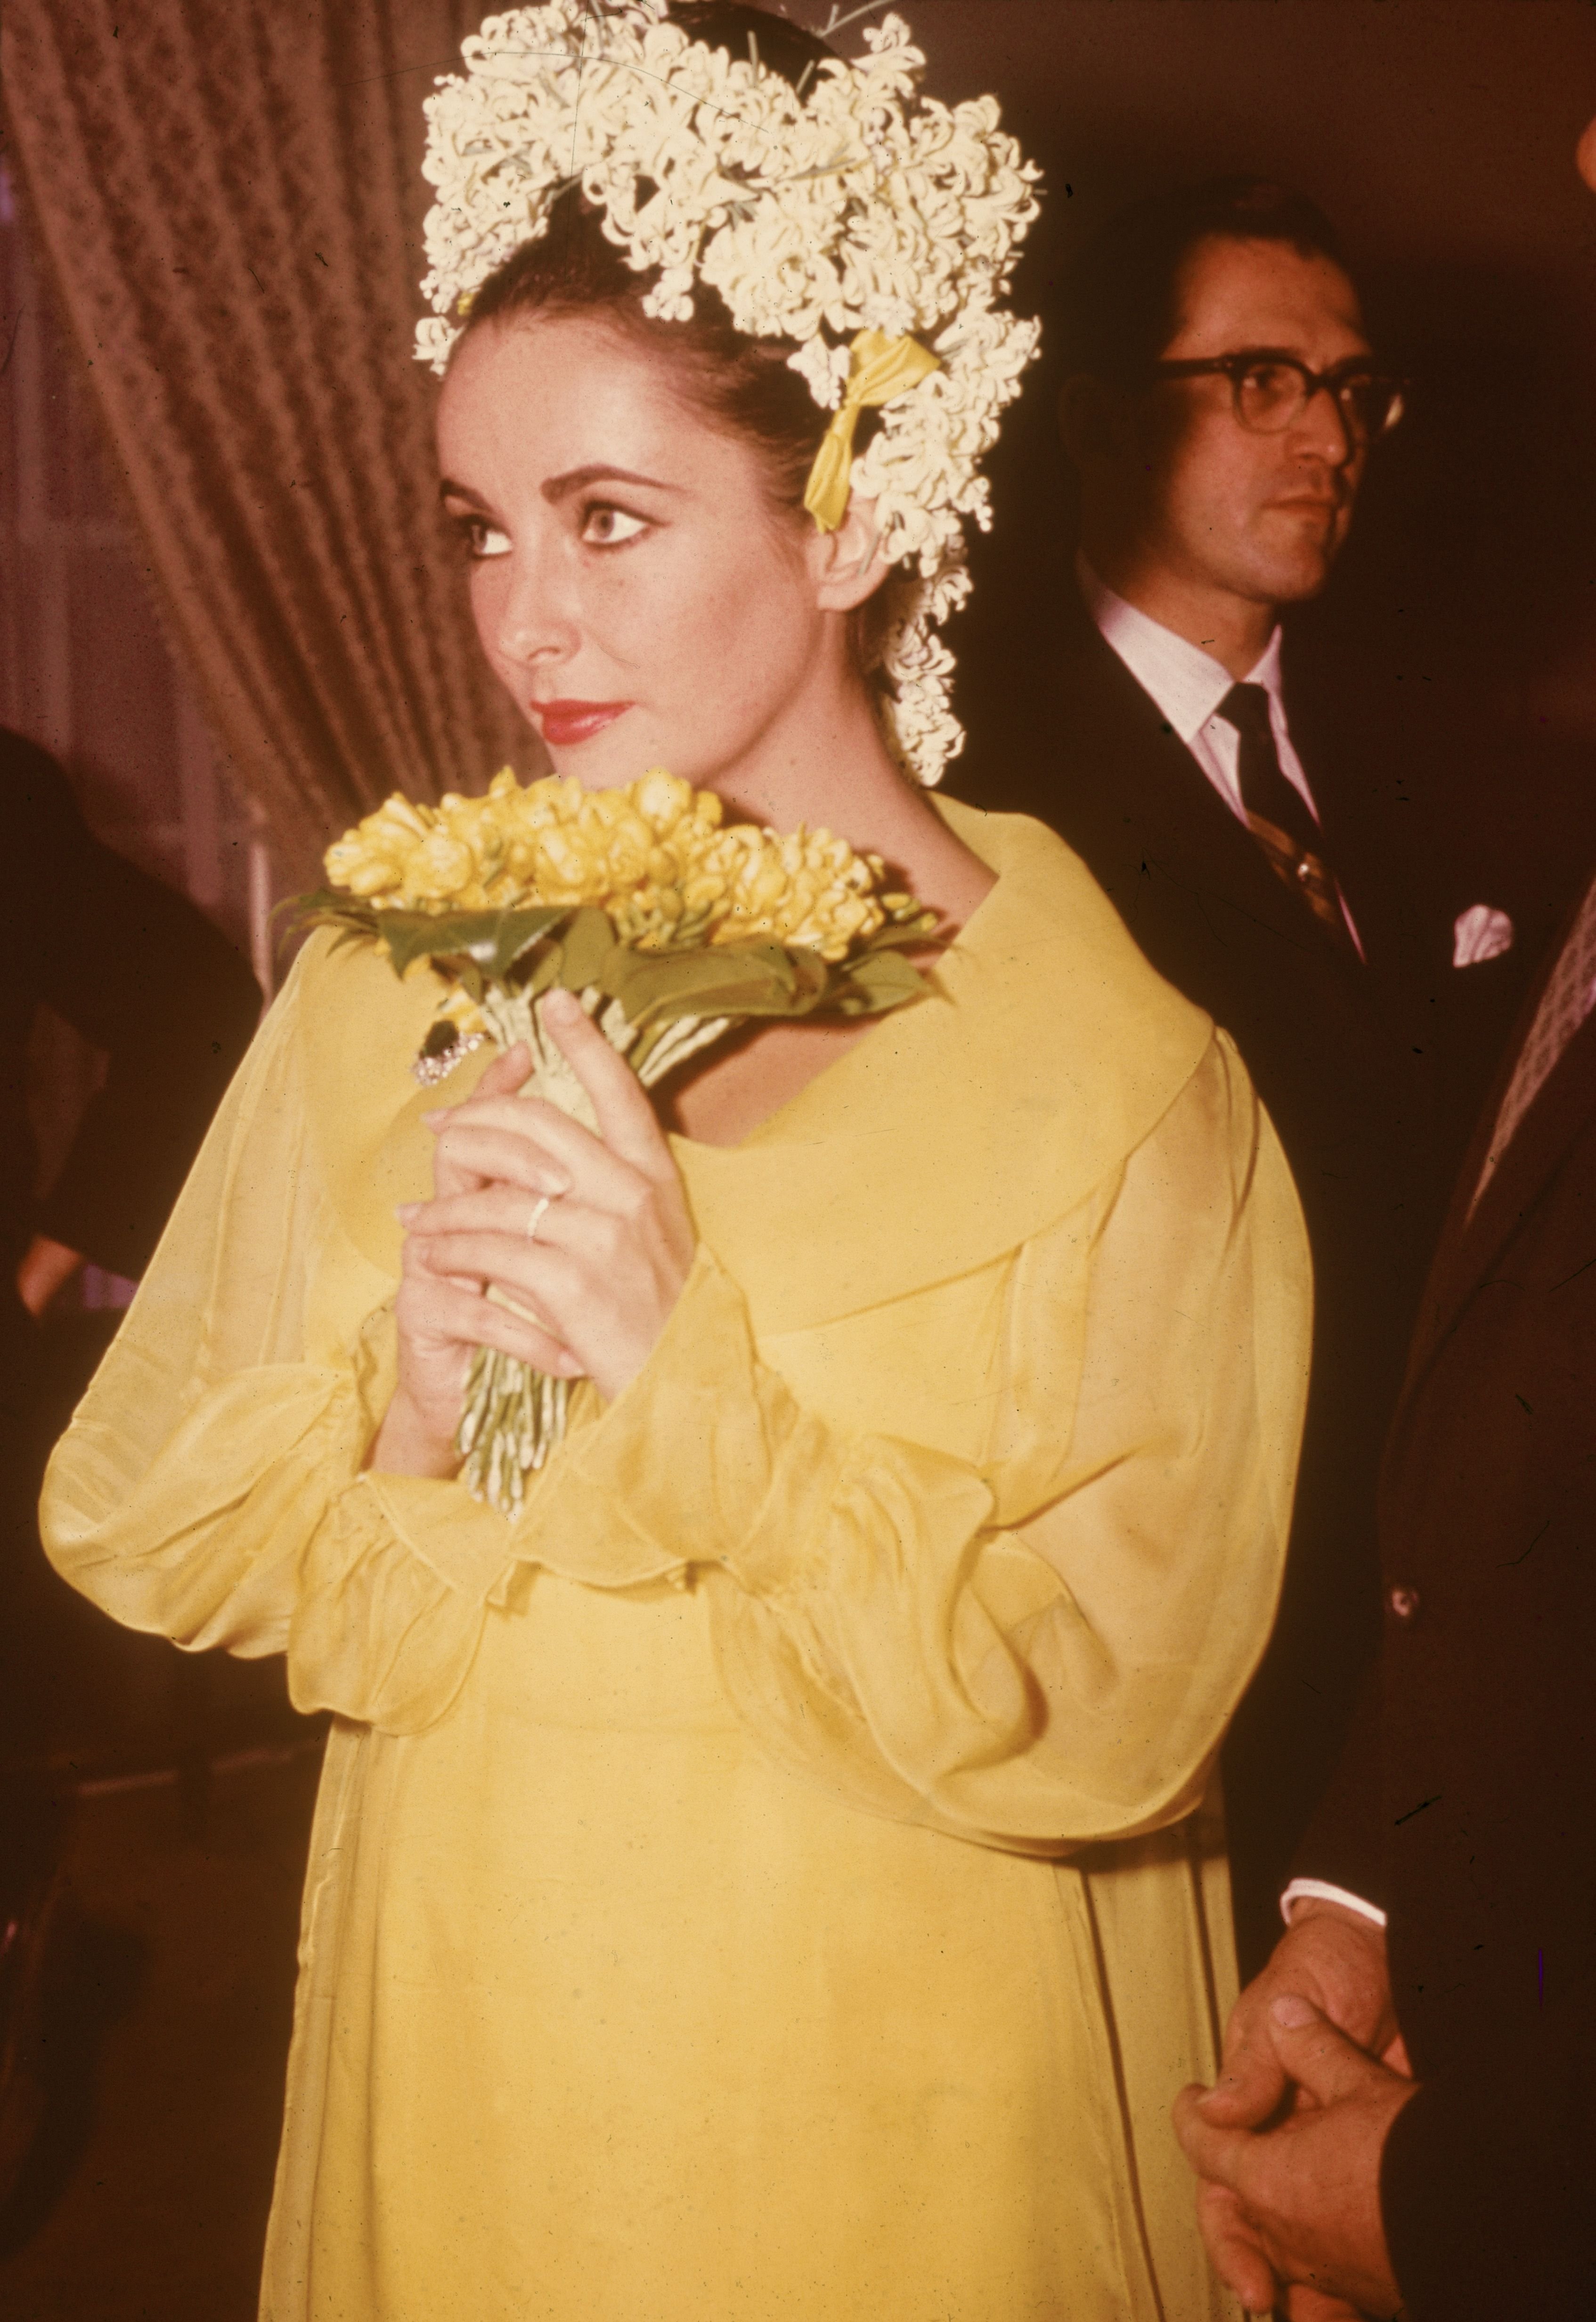 Elizabeth Taylor holds a bouquet of flowers at her wedding to actor Richard Burton on March 15, 1964.| Photo: Hulton Archive/Getty Images